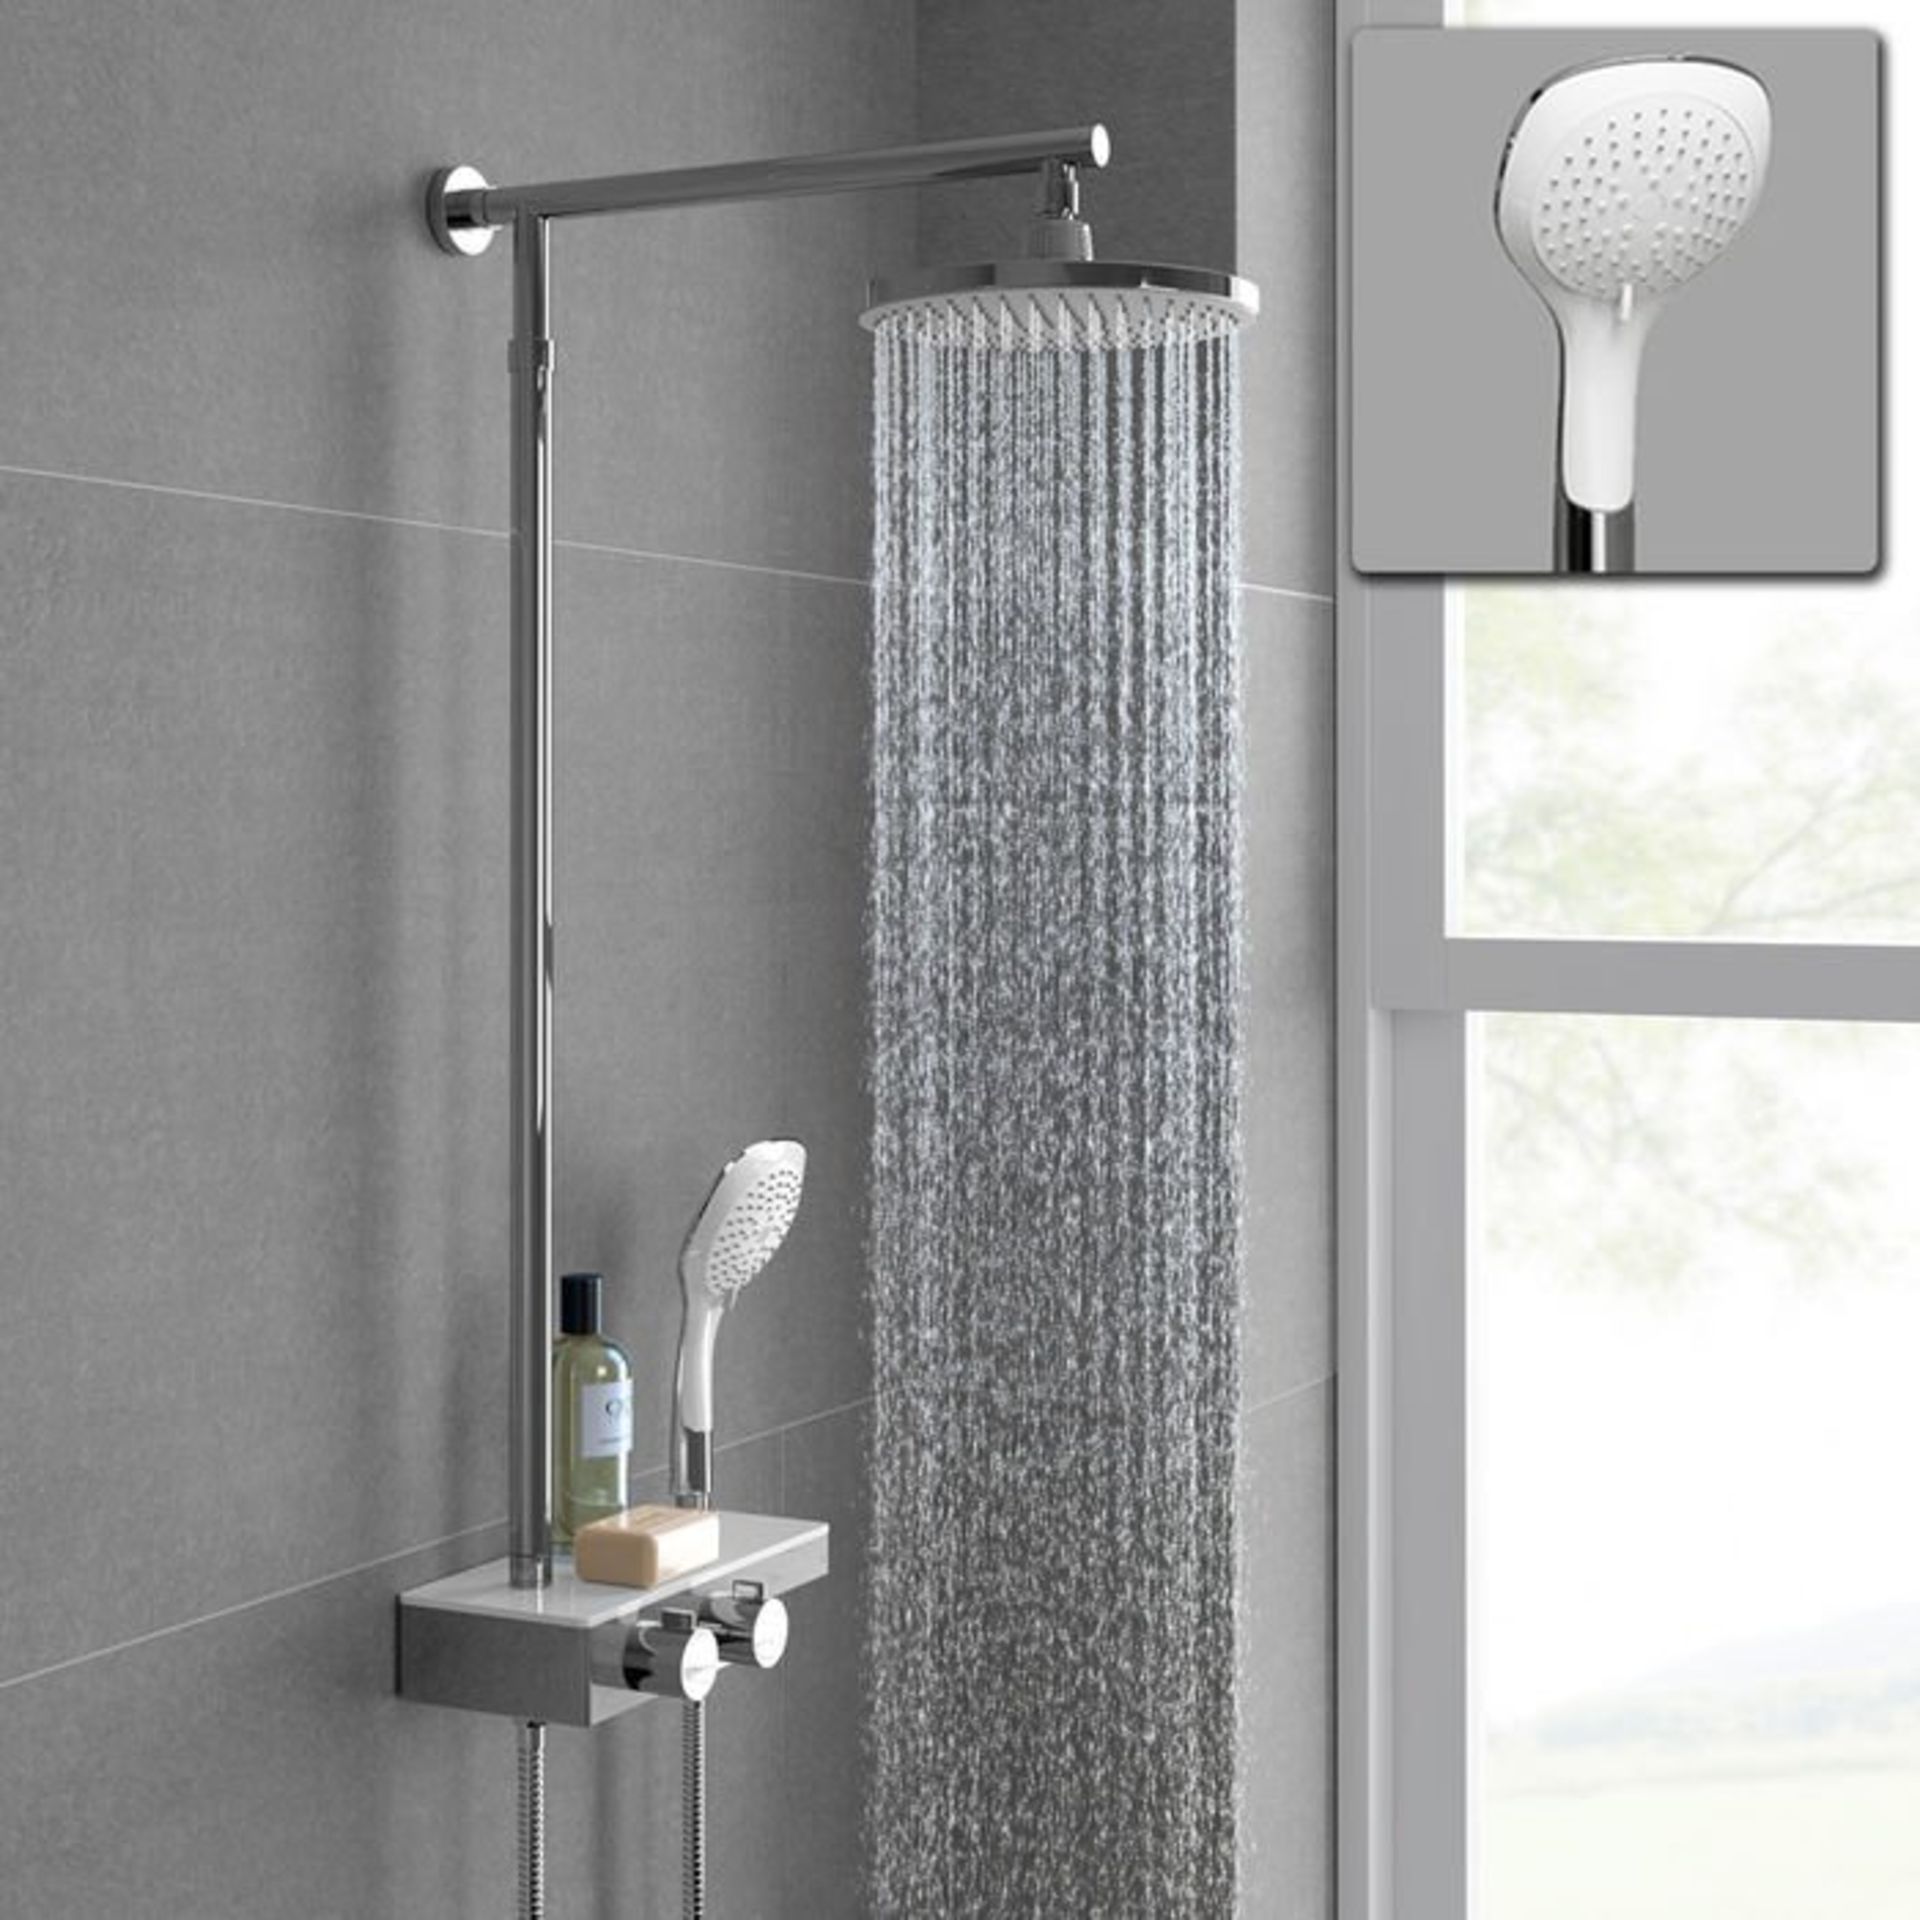 (S42)Round Exposed Thermostatic Mixer Shower Kit Medium Head & Shelf. Cool to touch shower for